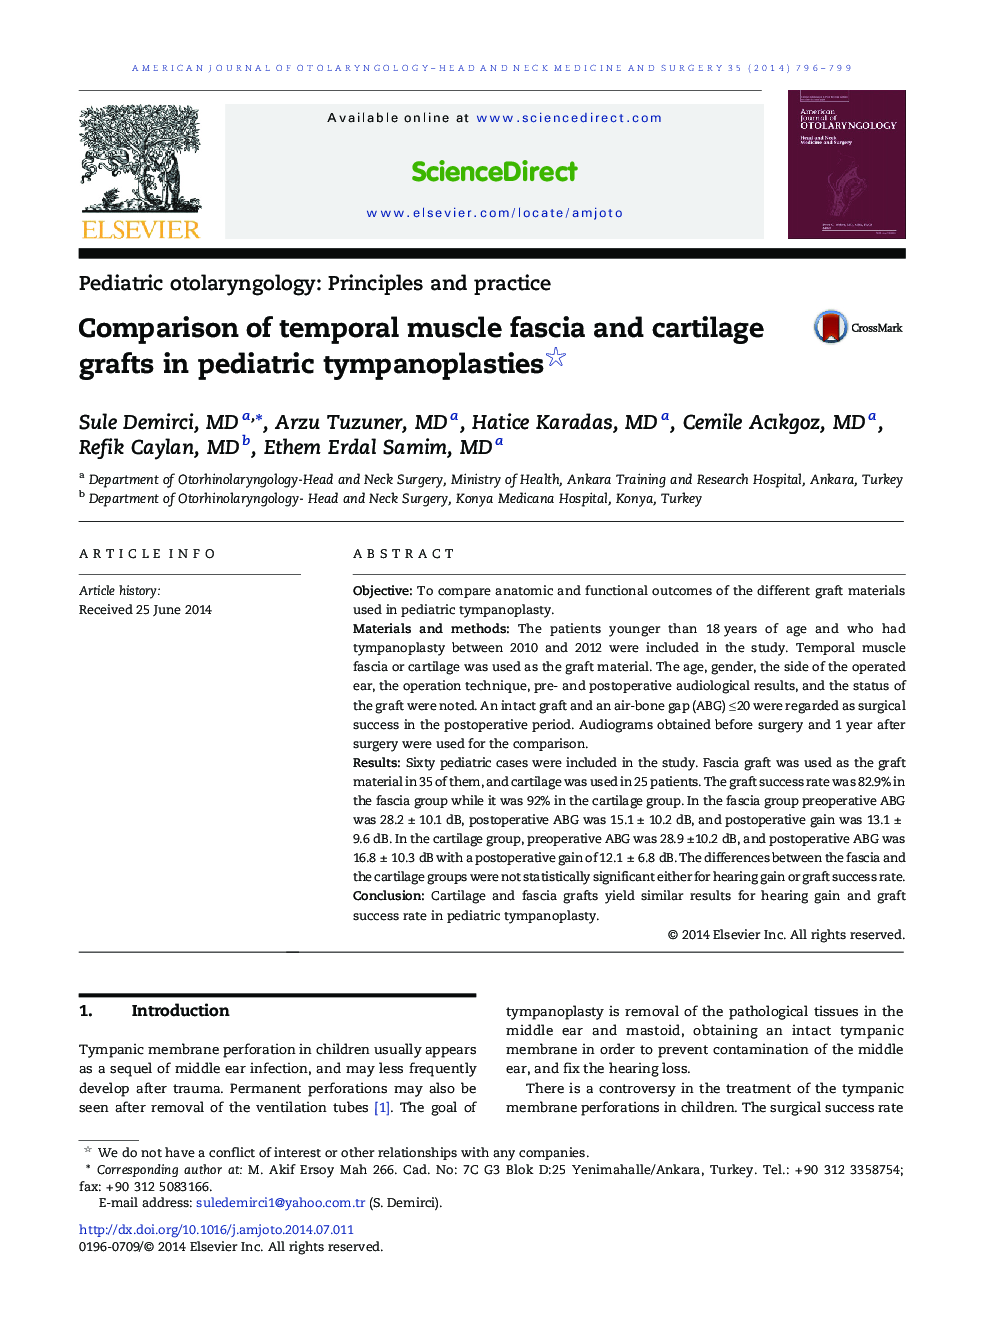 Comparison of temporal muscle fascia and cartilage grafts in pediatric tympanoplasties 